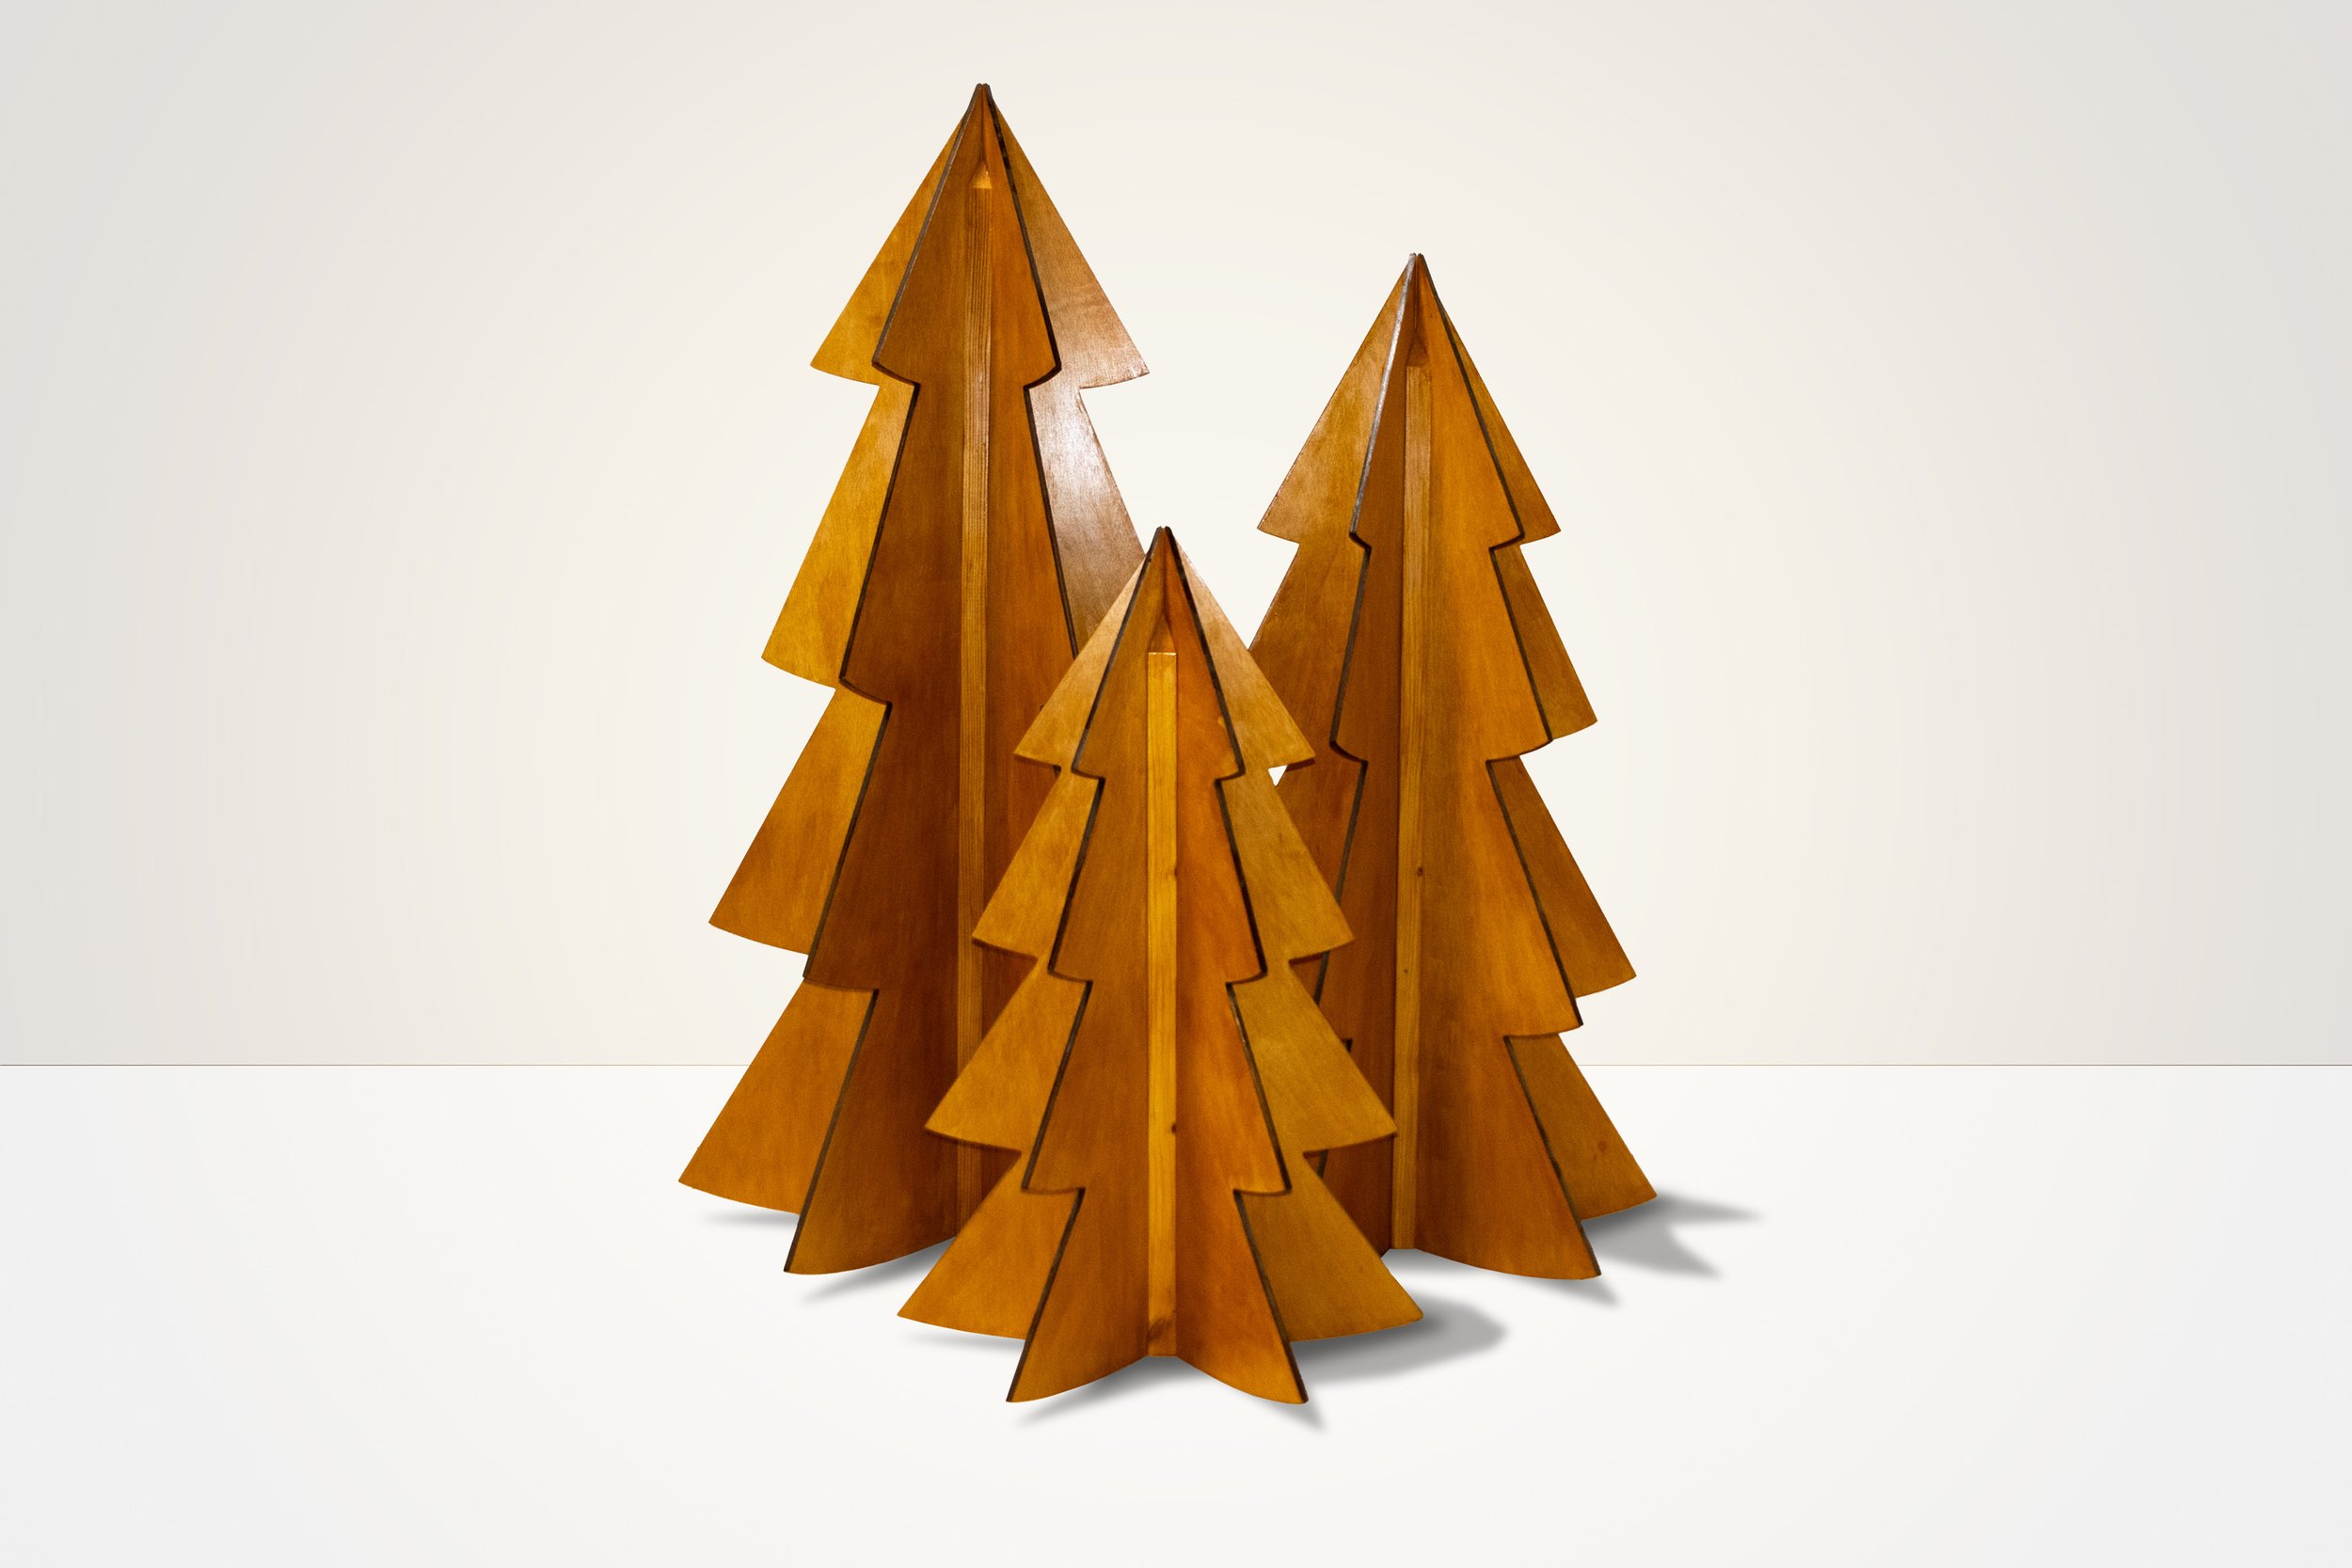 The Wooden Christmas Trees